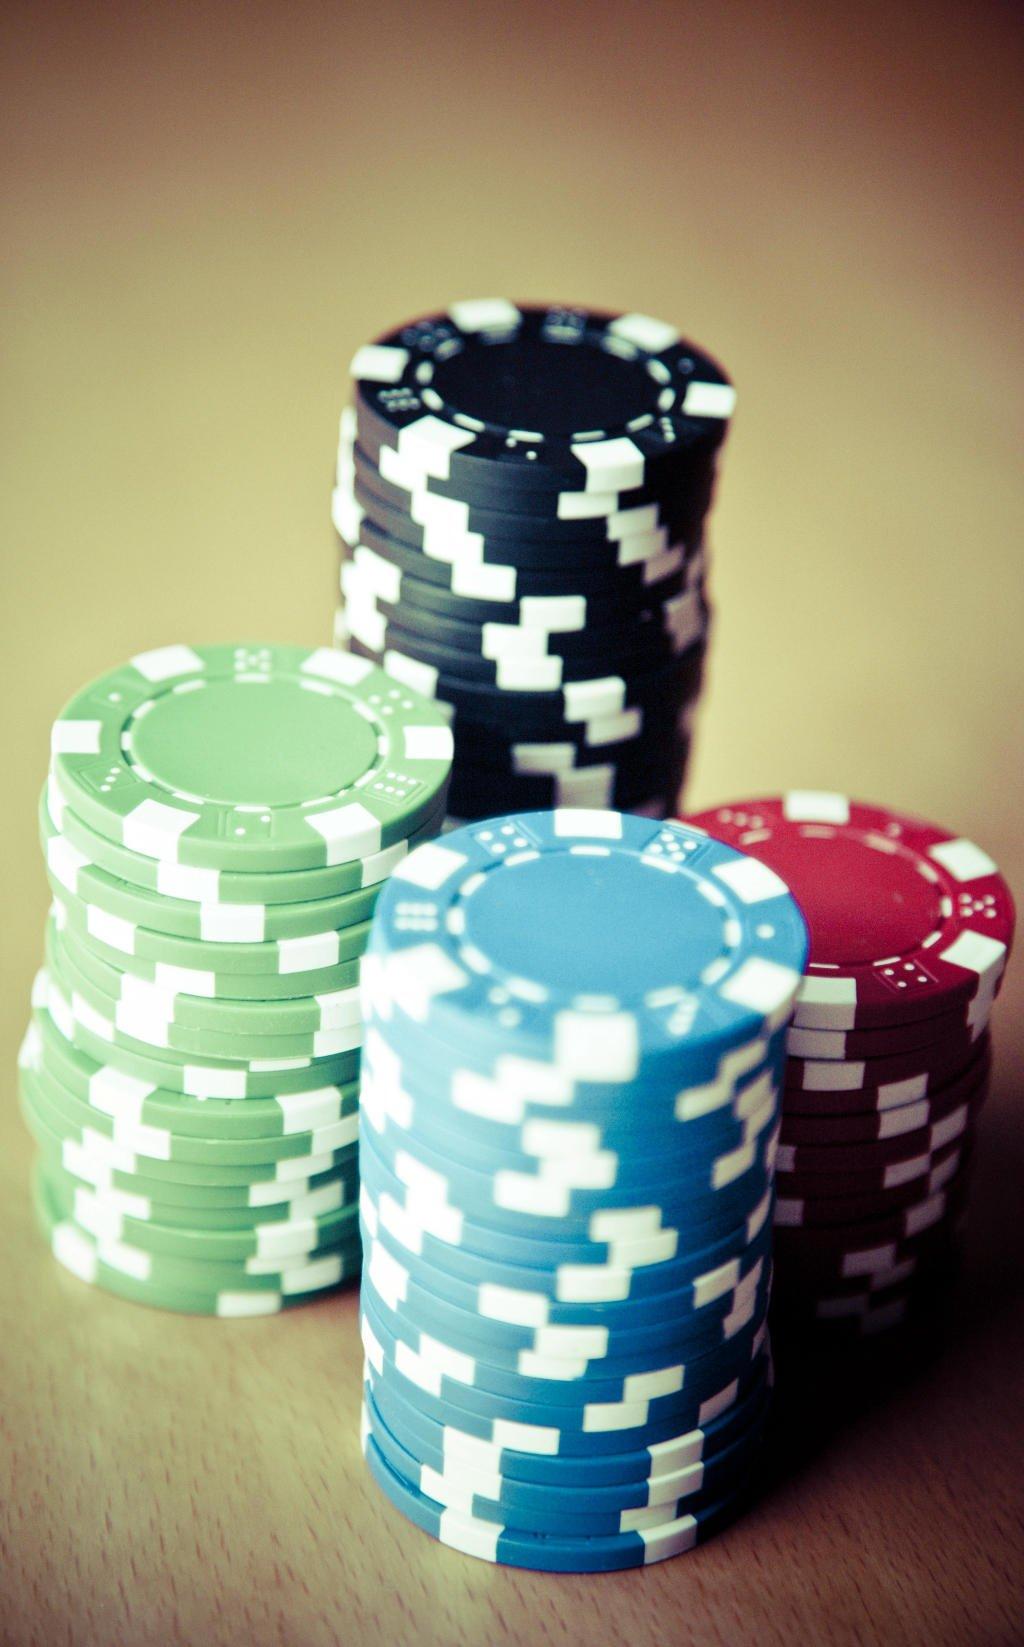 Guide to finding the best online casino for you